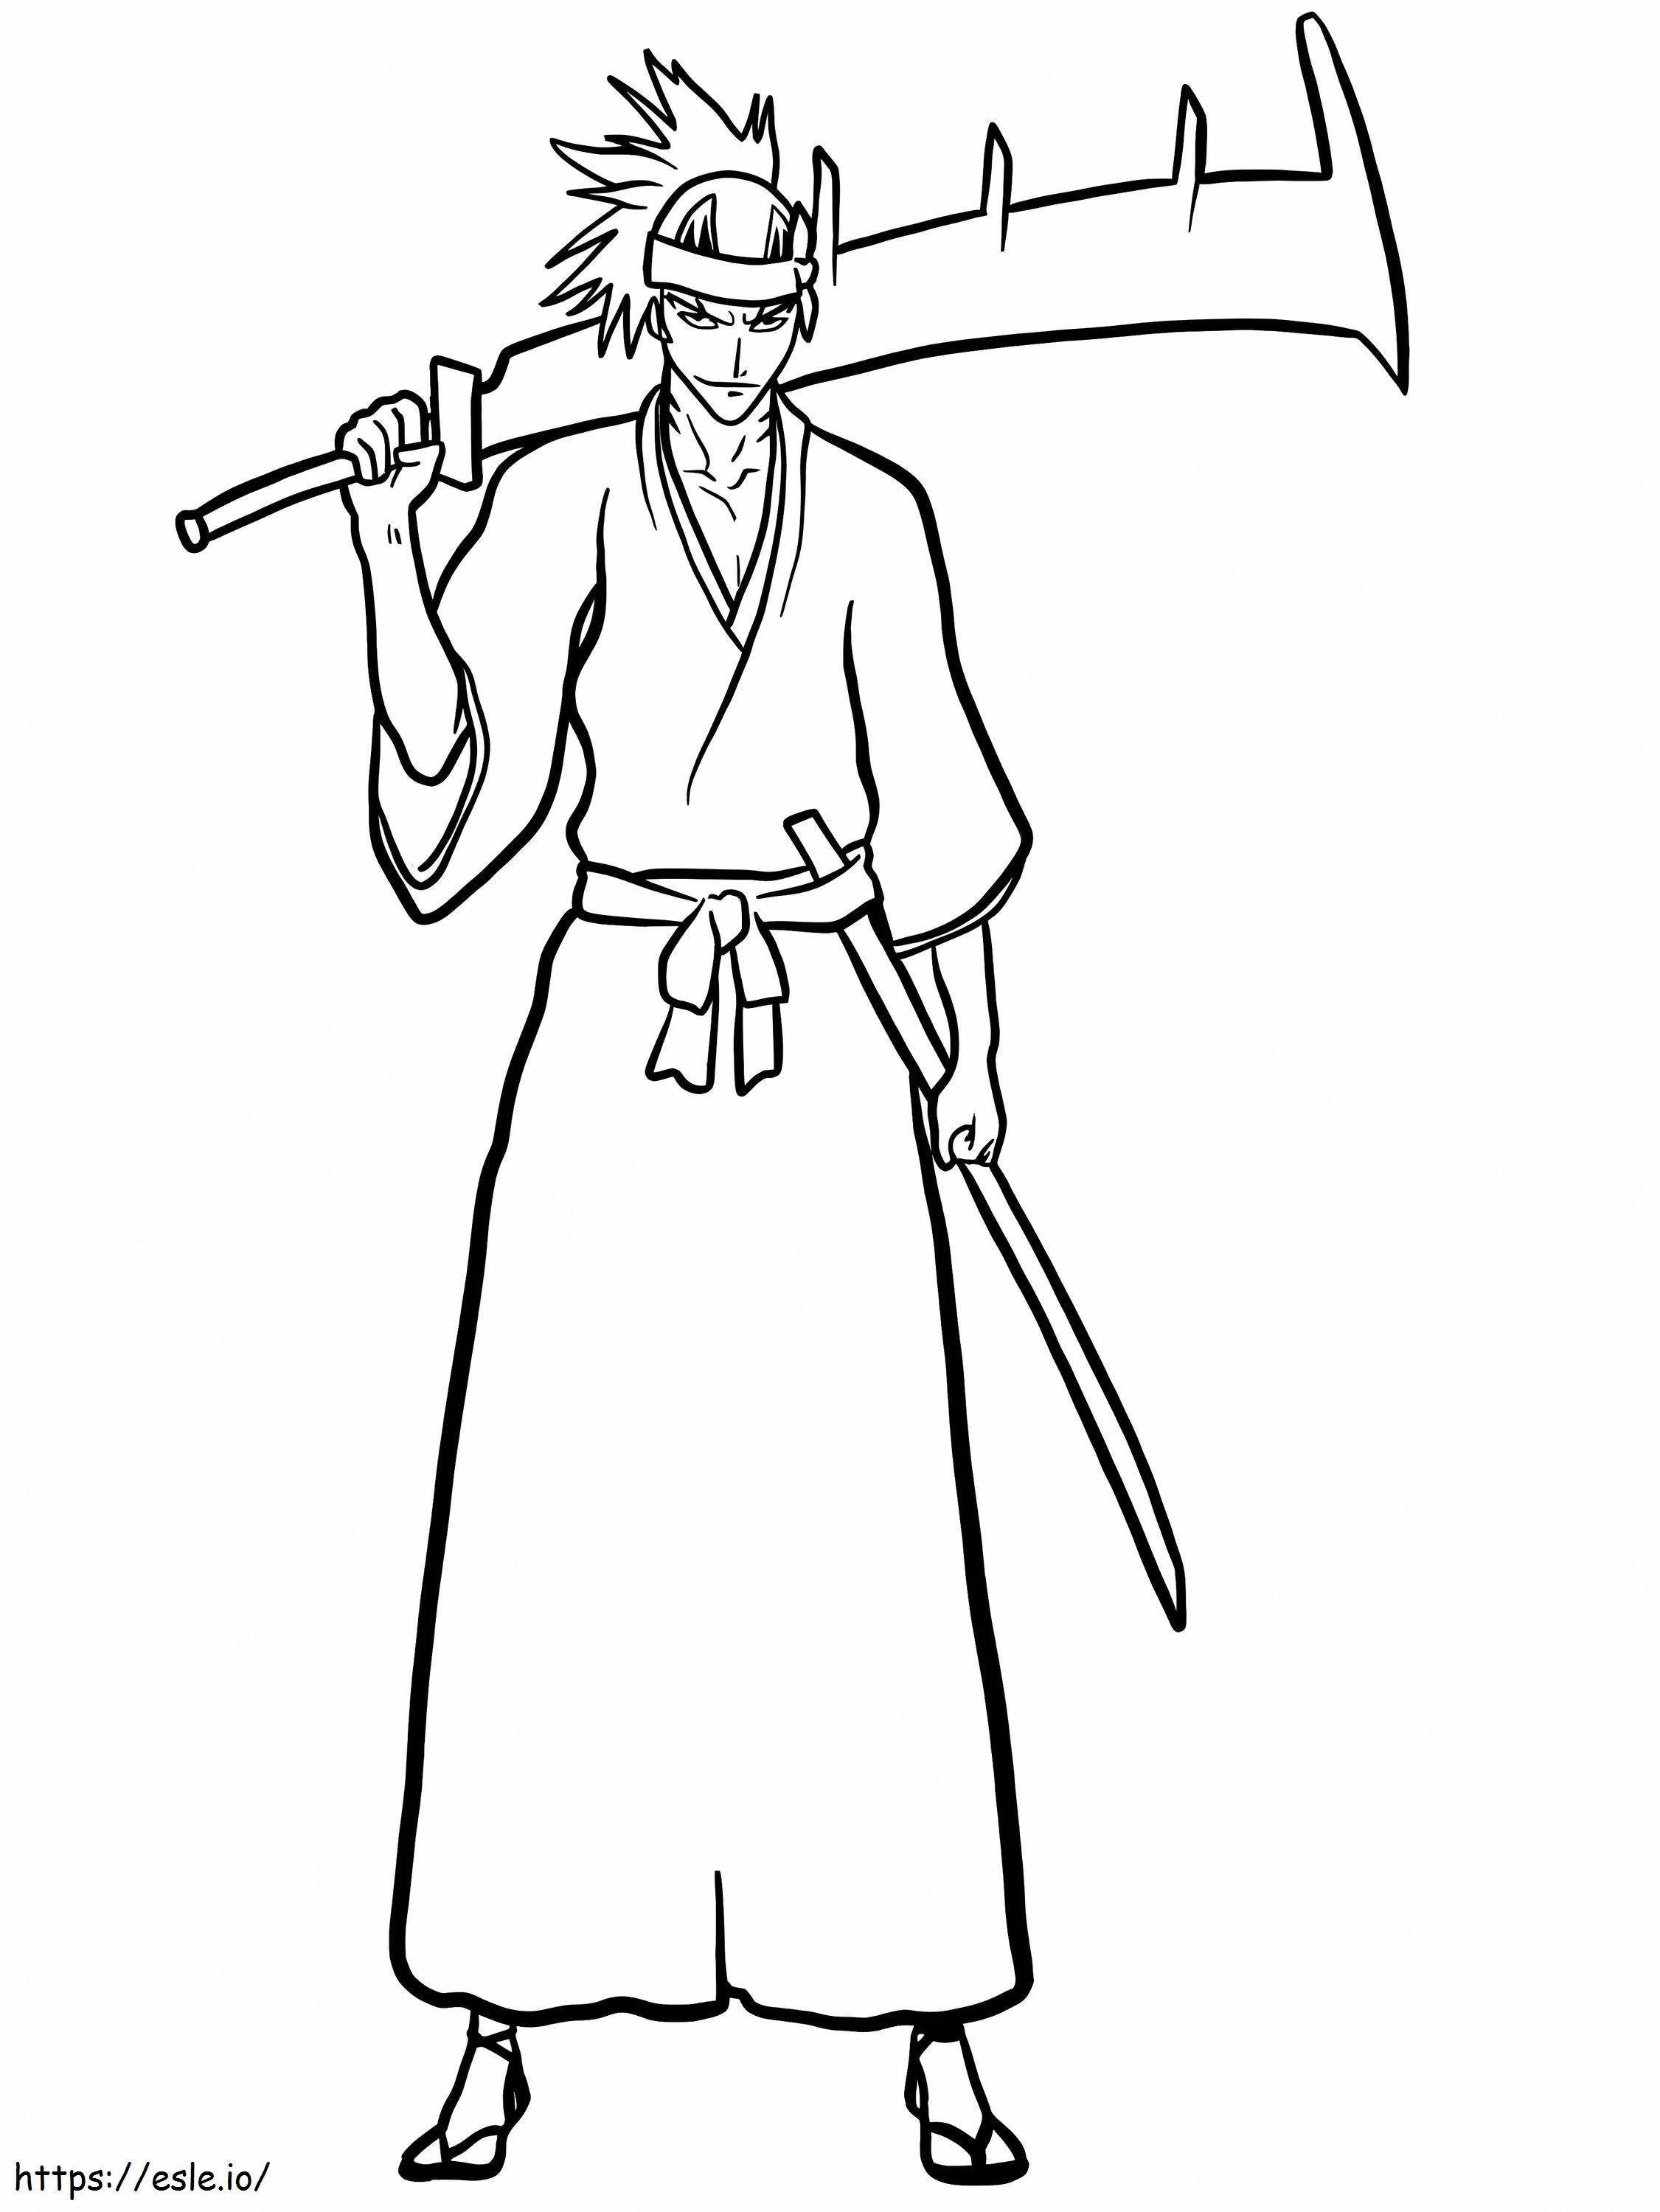 Renji From Bleach coloring page